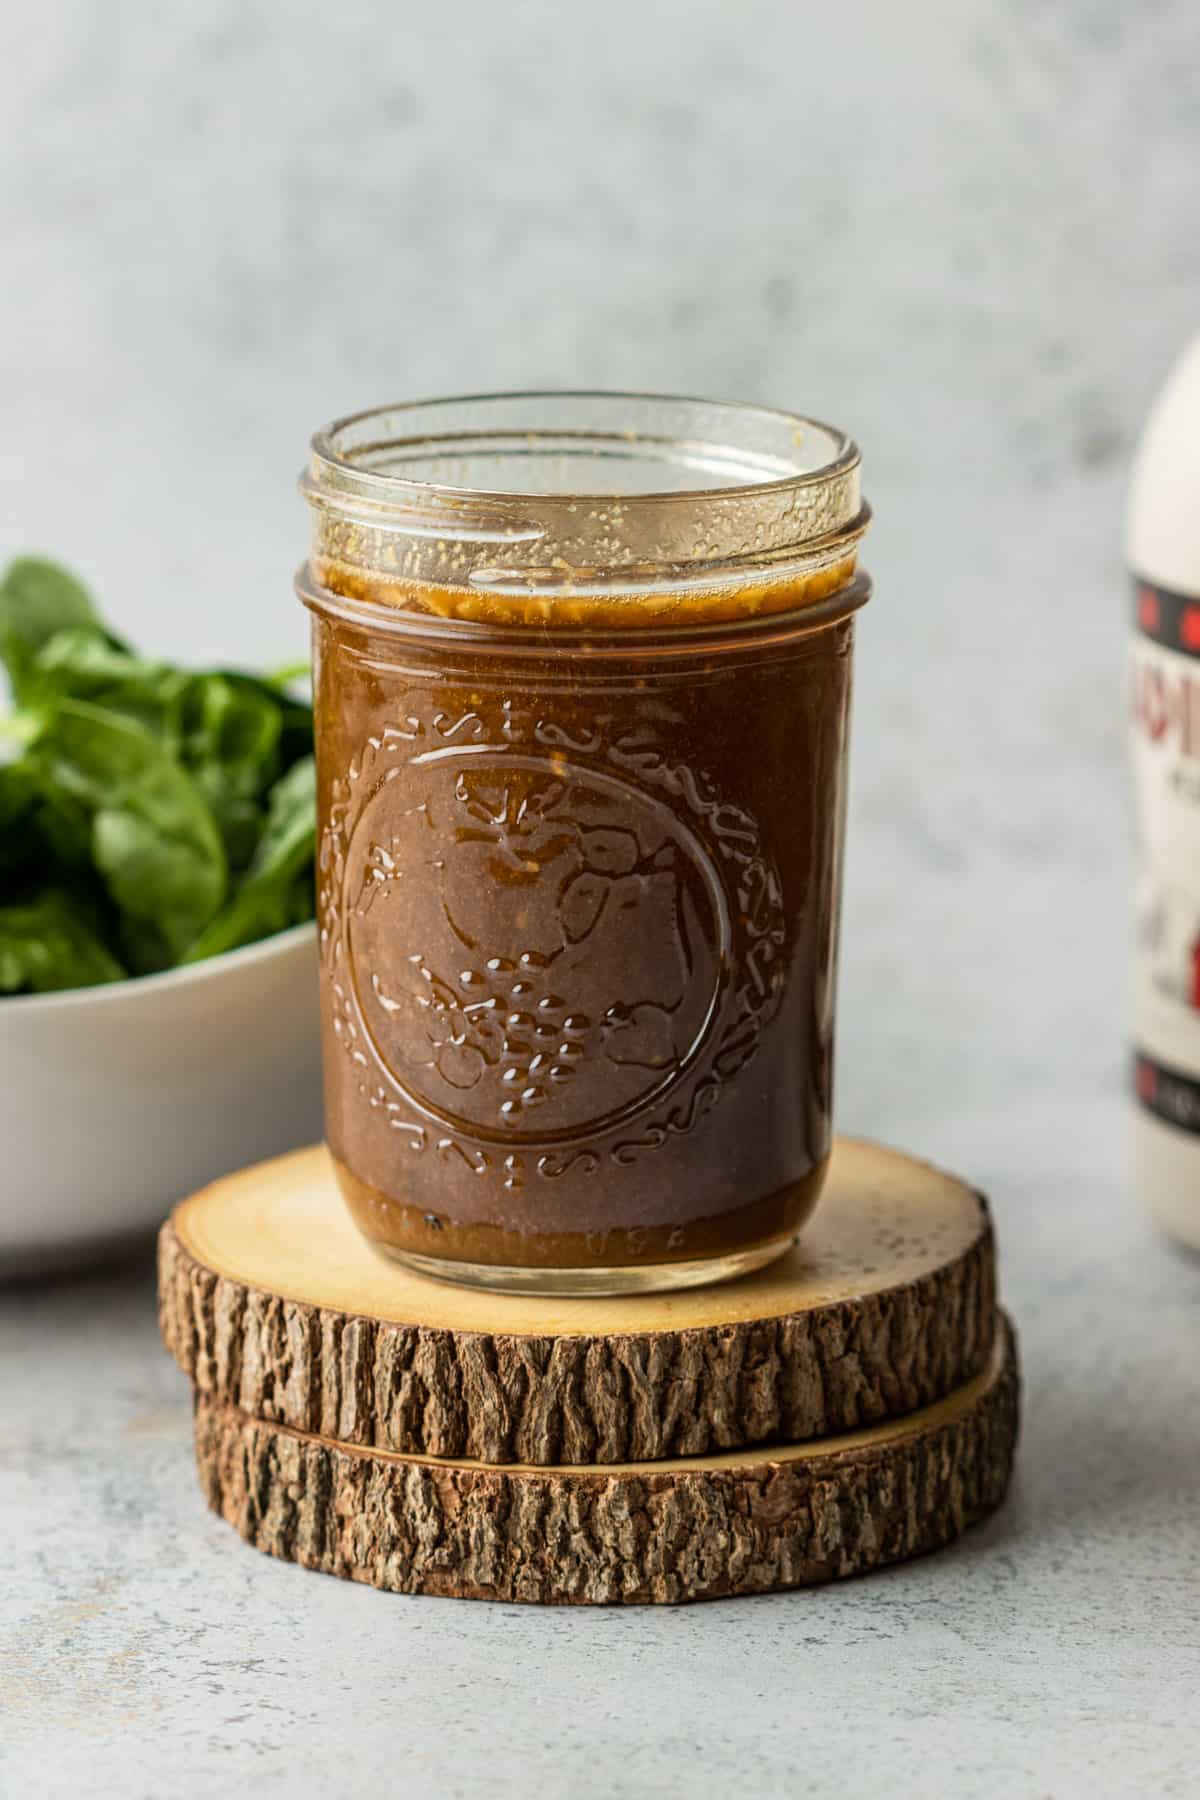 Homemade balsamic dressing in a jar on two wooden coasters with a jug of maple syrup and bowl of spinach.